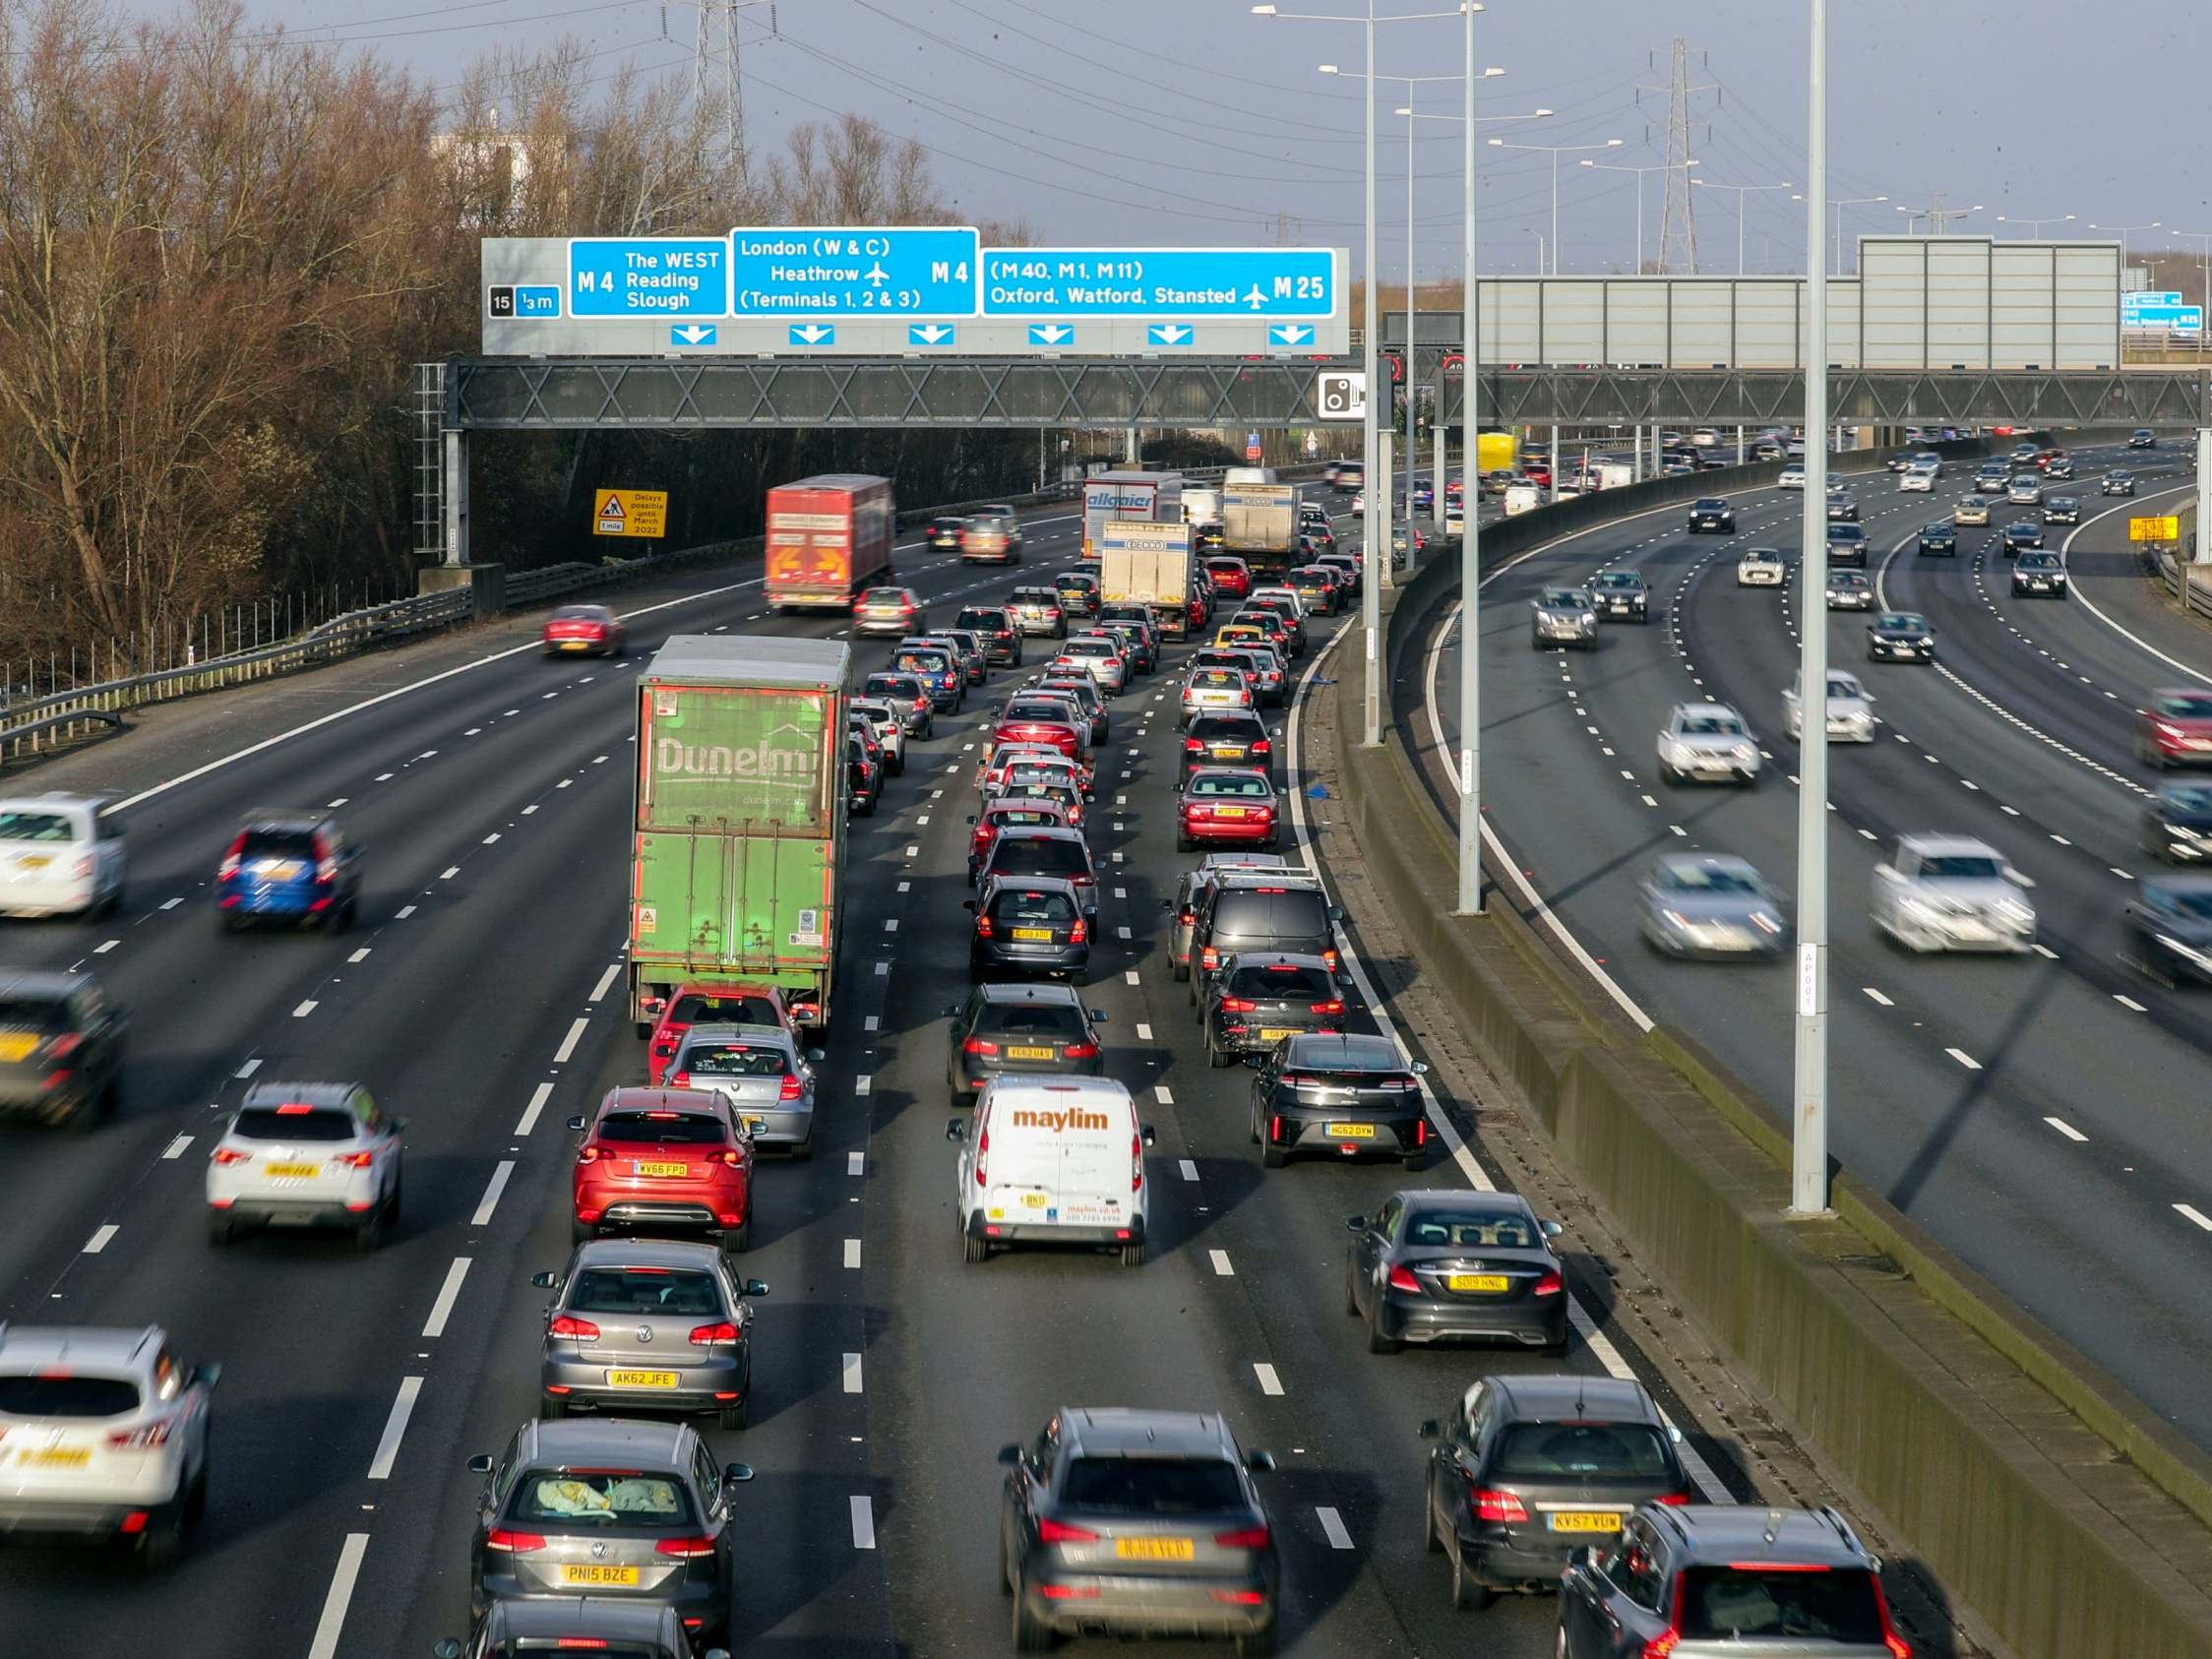 The M25 would be a quarantine boundary under the plans